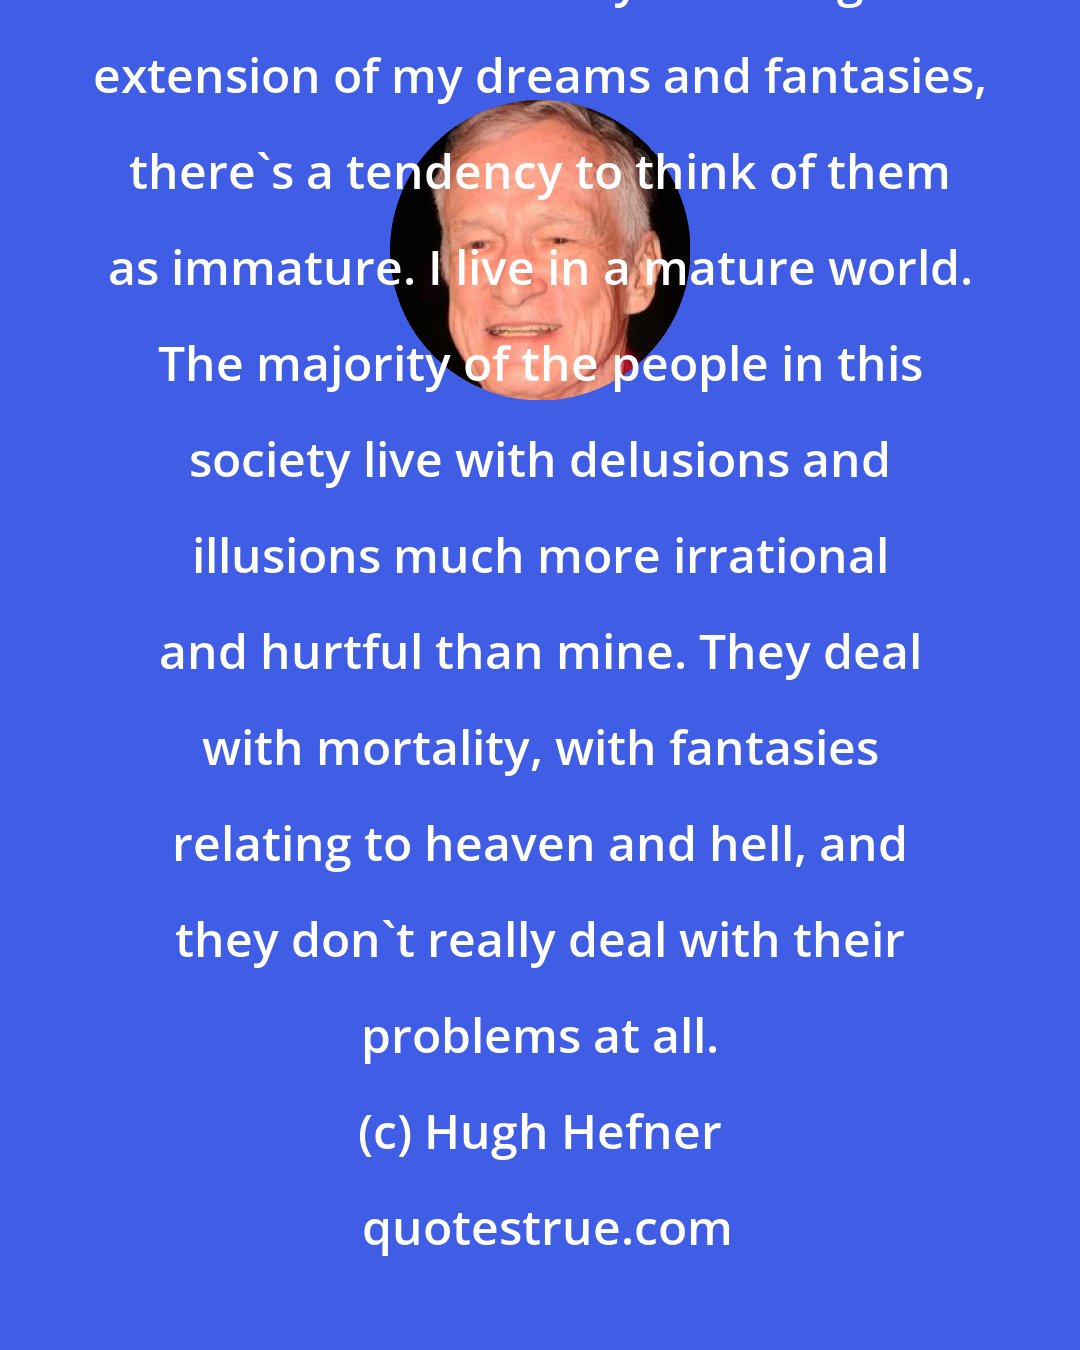 Hugh Hefner: Nothing goes on forever. I think that's one of the illusions of life. When I talk about my life being an extension of my dreams and fantasies, there's a tendency to think of them as immature. I live in a mature world. The majority of the people in this society live with delusions and illusions much more irrational and hurtful than mine. They deal with mortality, with fantasies relating to heaven and hell, and they don't really deal with their problems at all.